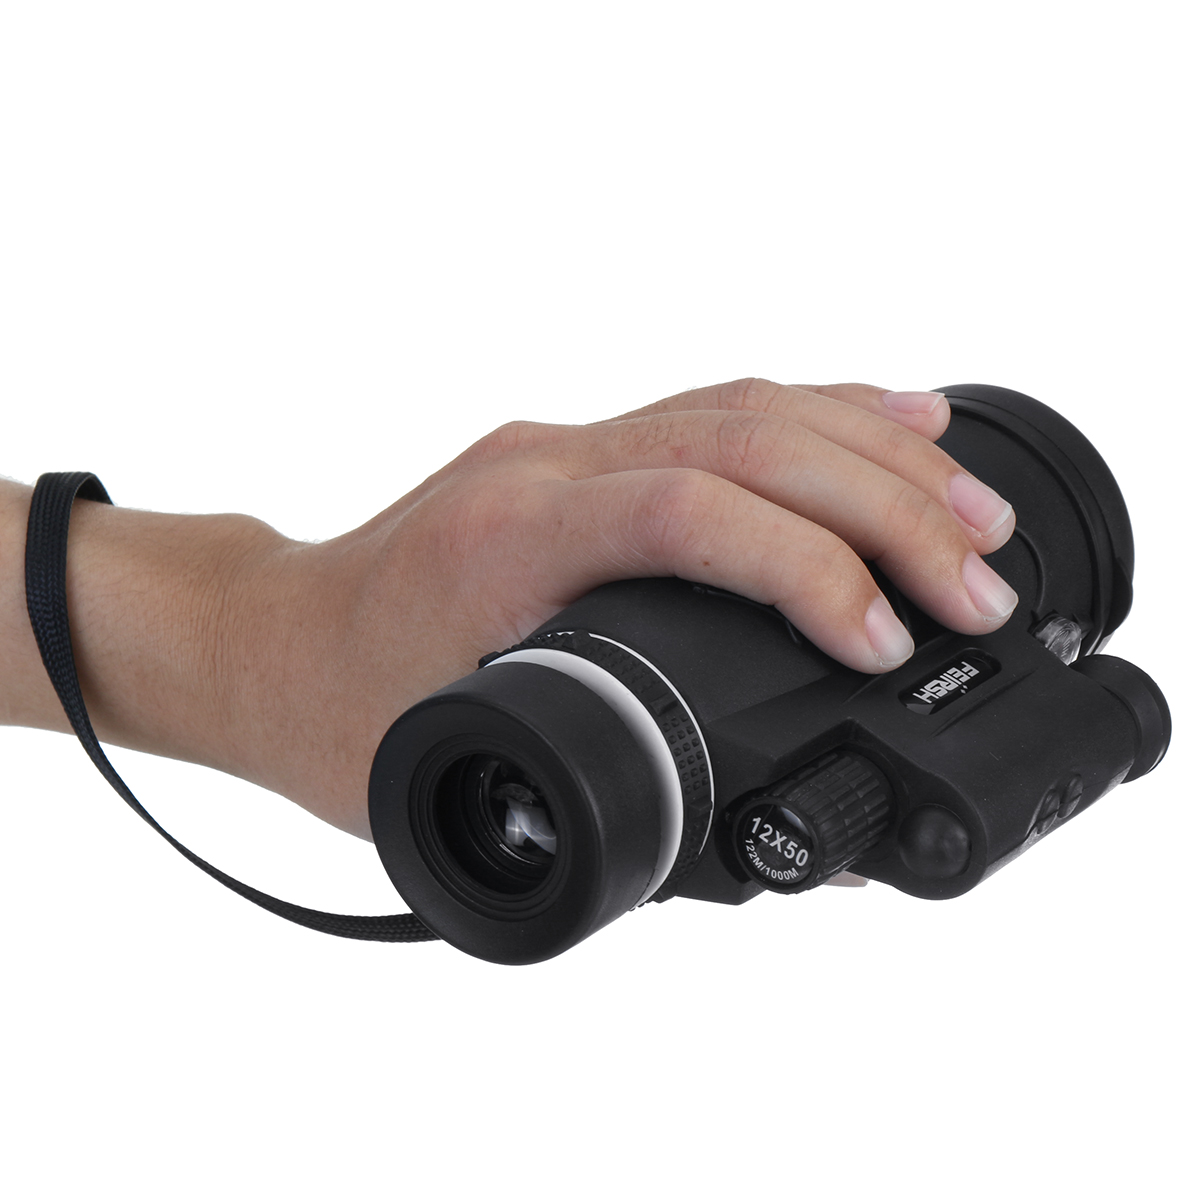 1250-High-Optical-Monocular-with-Laser-Night-Light-Function-Portable-Telescope-for-Bird-Watching-Tar-1858194-13